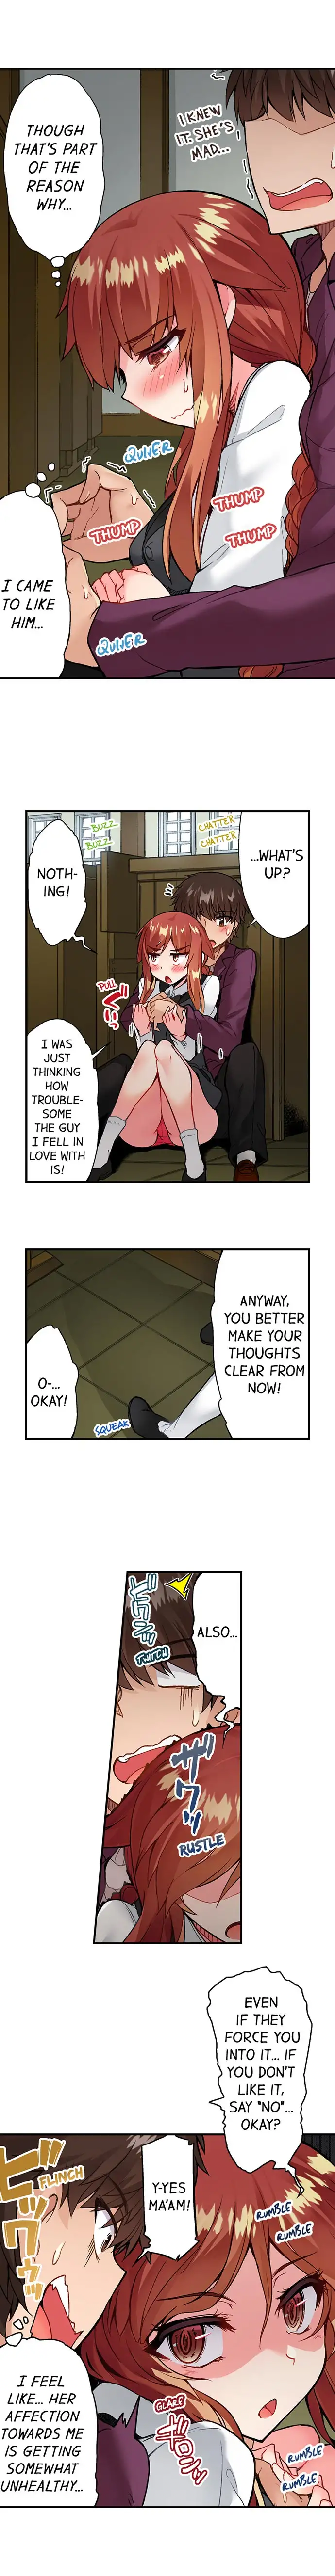 Traditional Job of Washing Girls’ Body - Chapter 70 Page 3